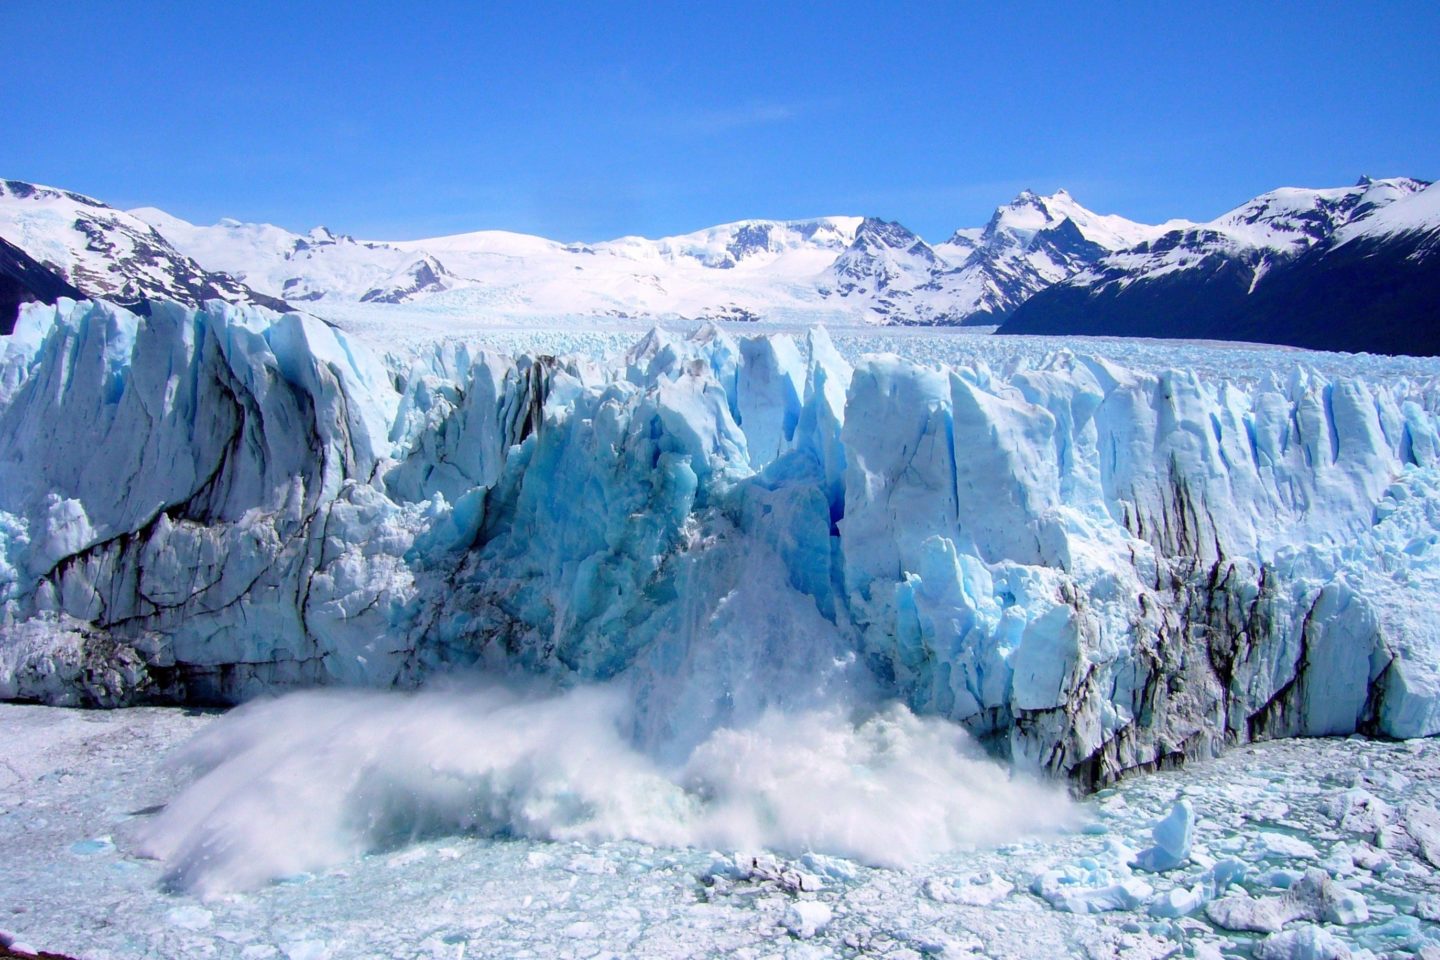 A glacier with jagged ice formations and misty cloud at its base.